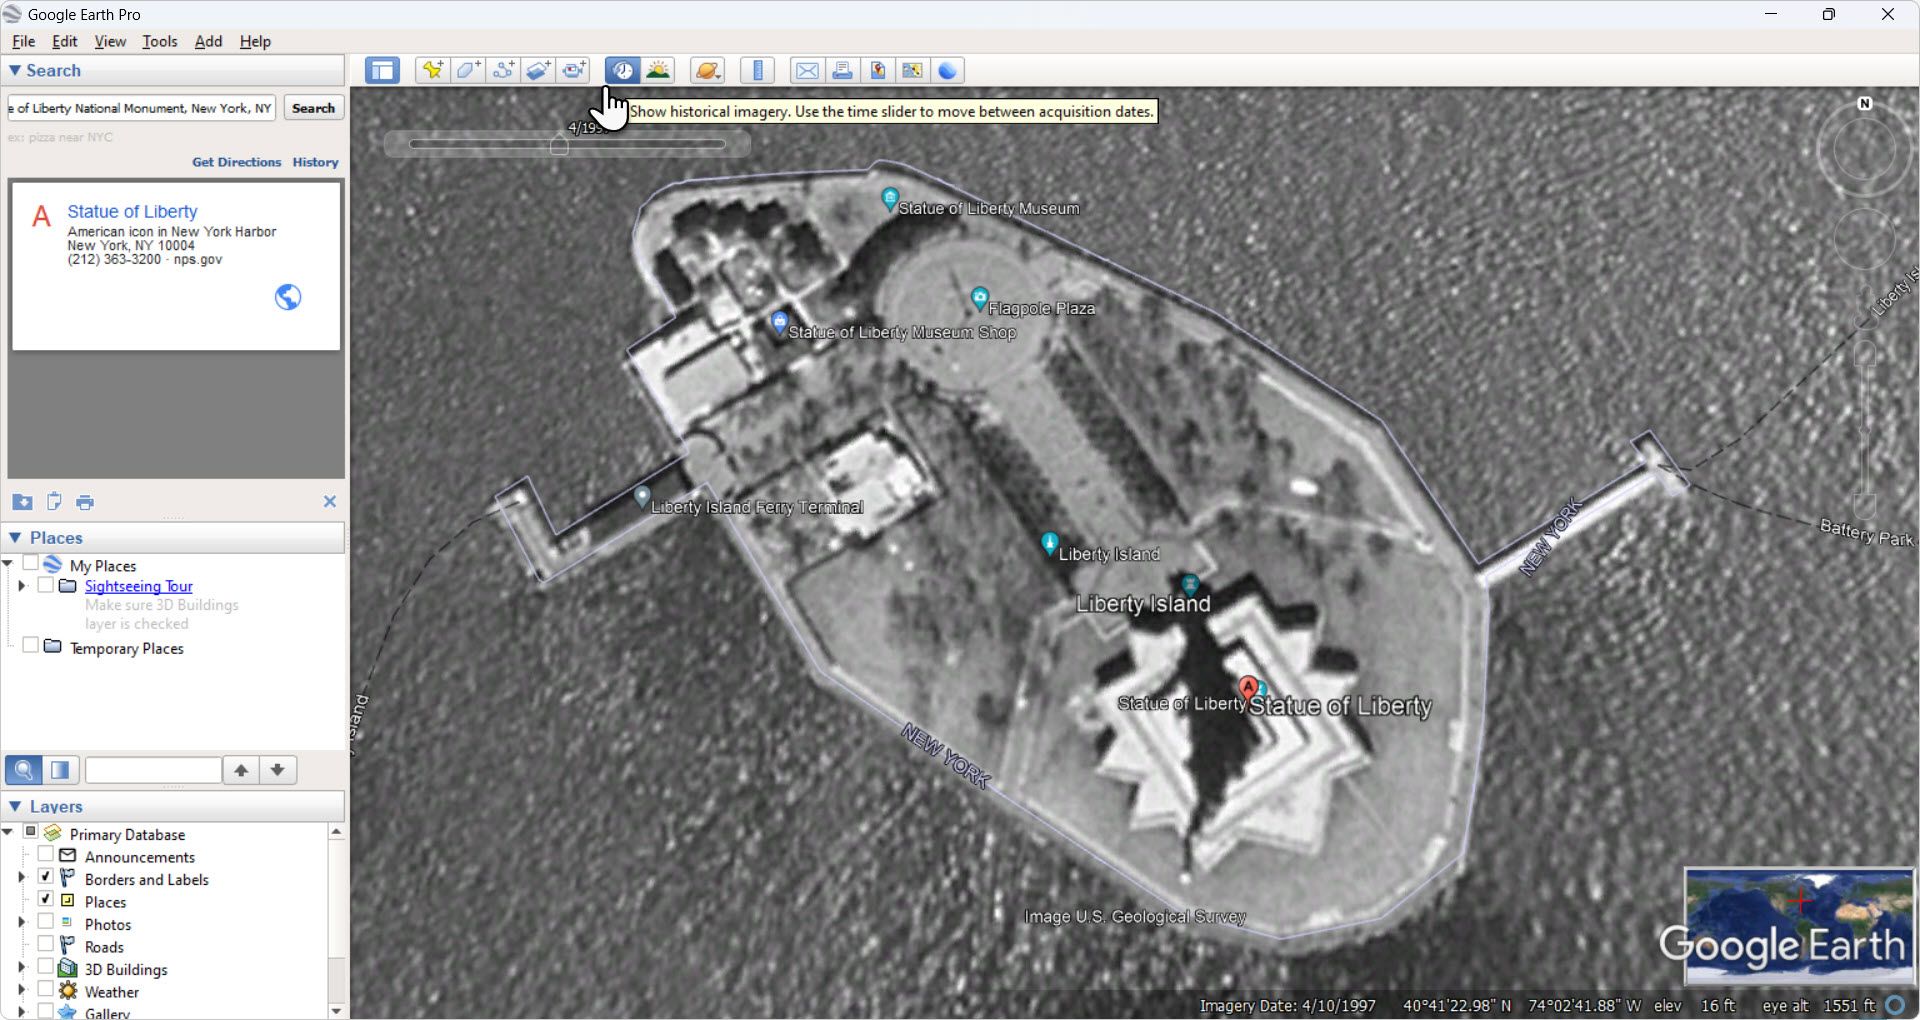 Google Earth Pro historical images